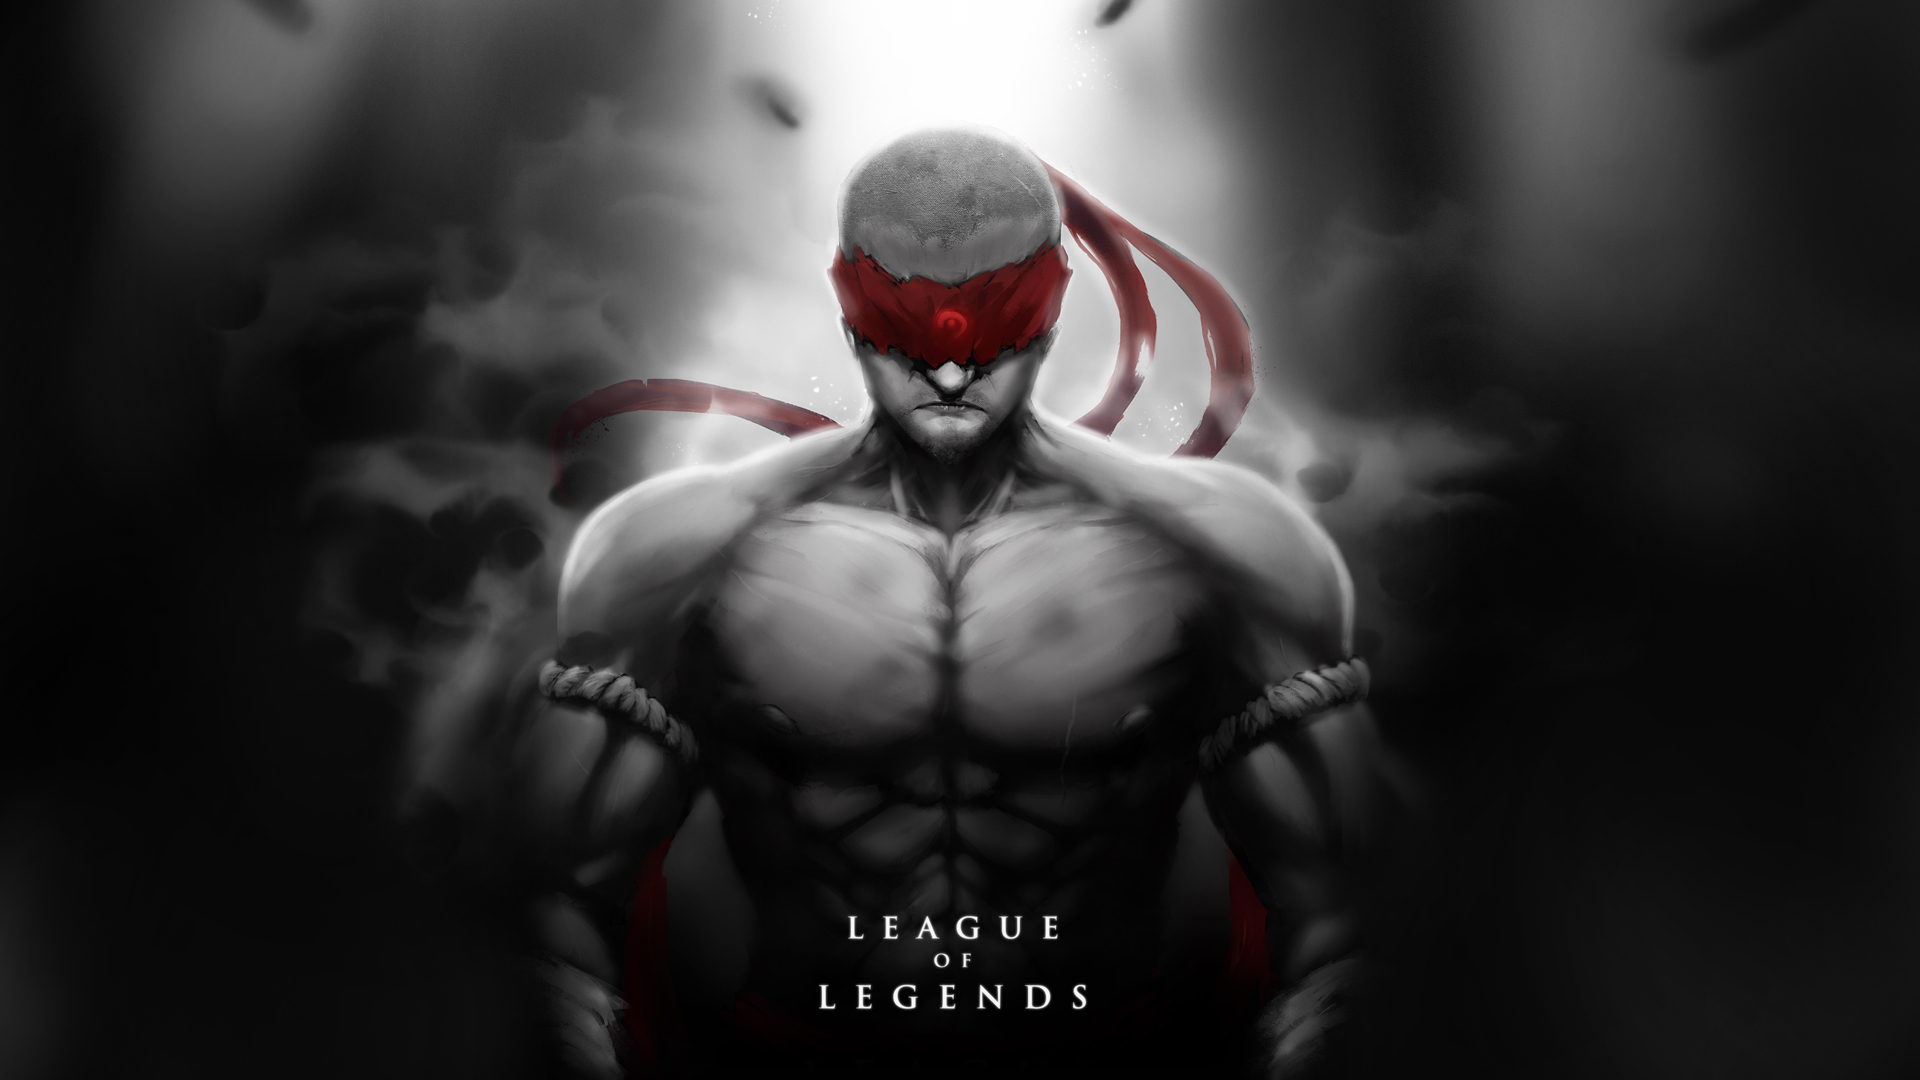 General 1920x1080 League of Legends Lee Sin (League of Legends) shirtless video game man selective coloring PC gaming